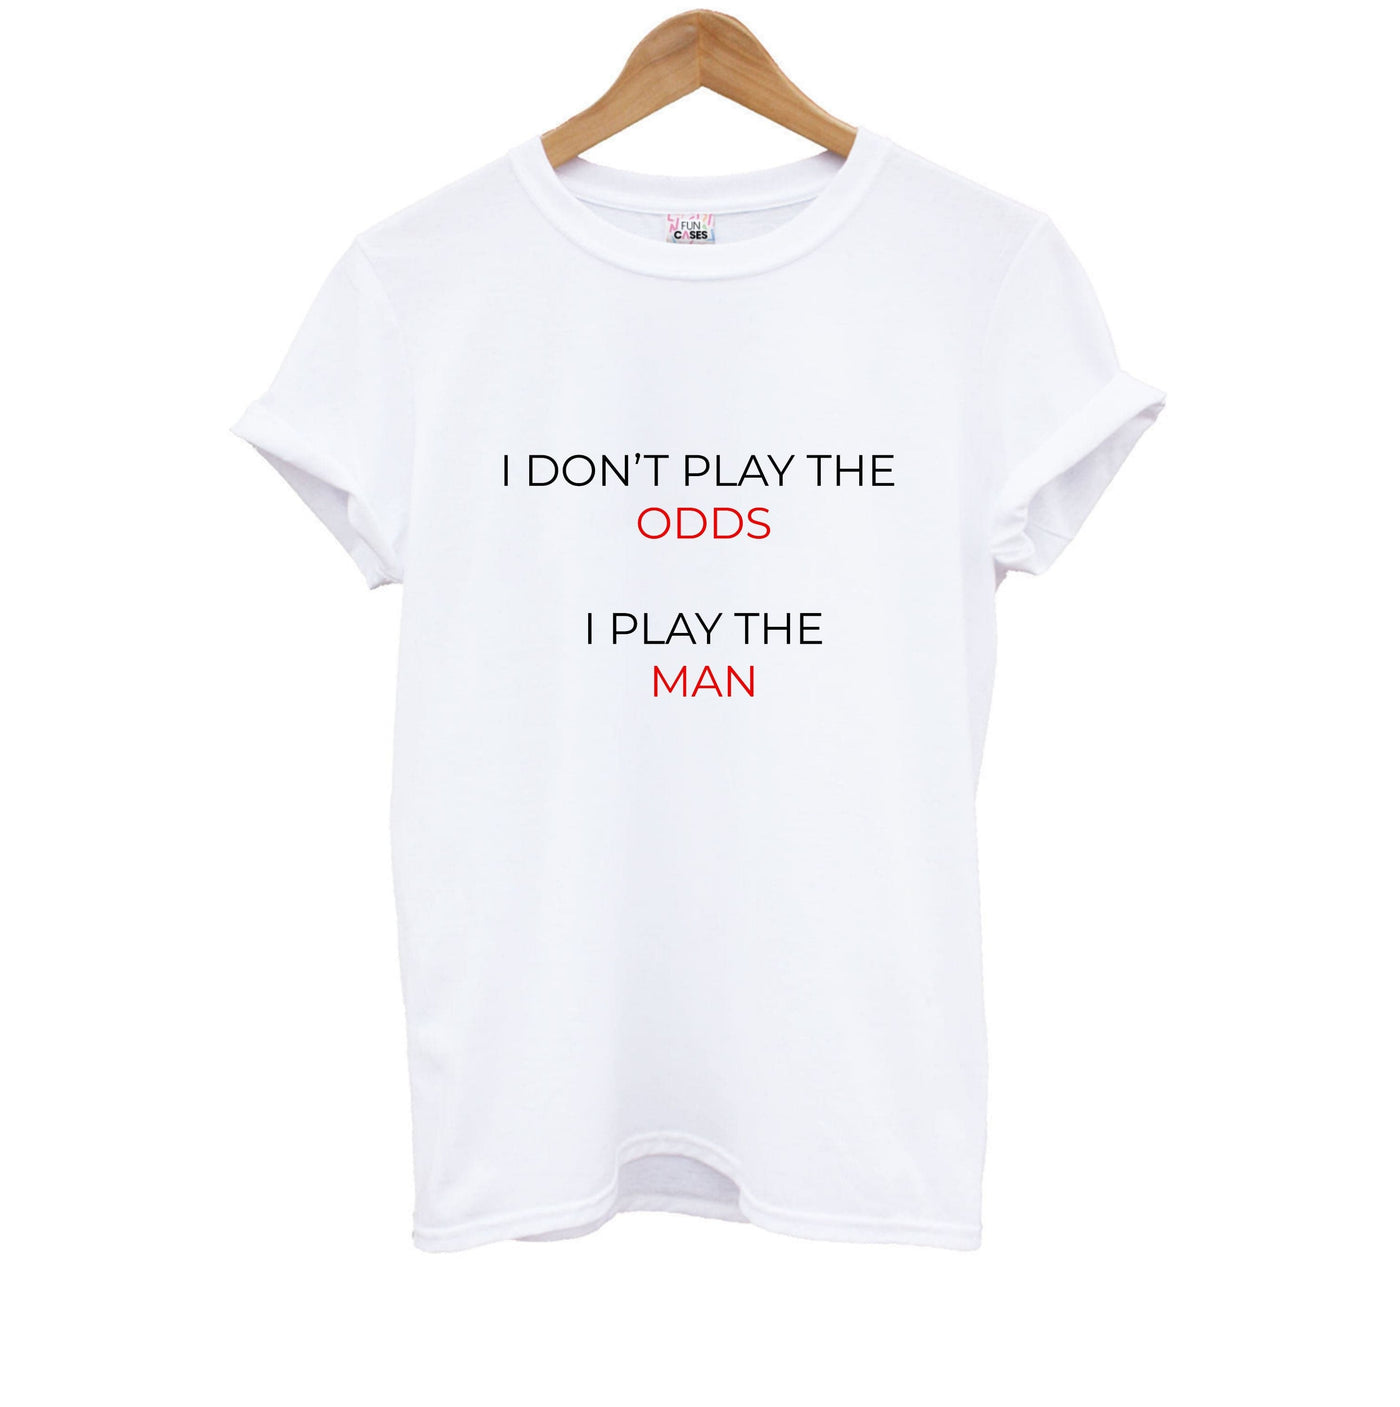 I Don't Play The Odds - Suits Kids T-Shirt